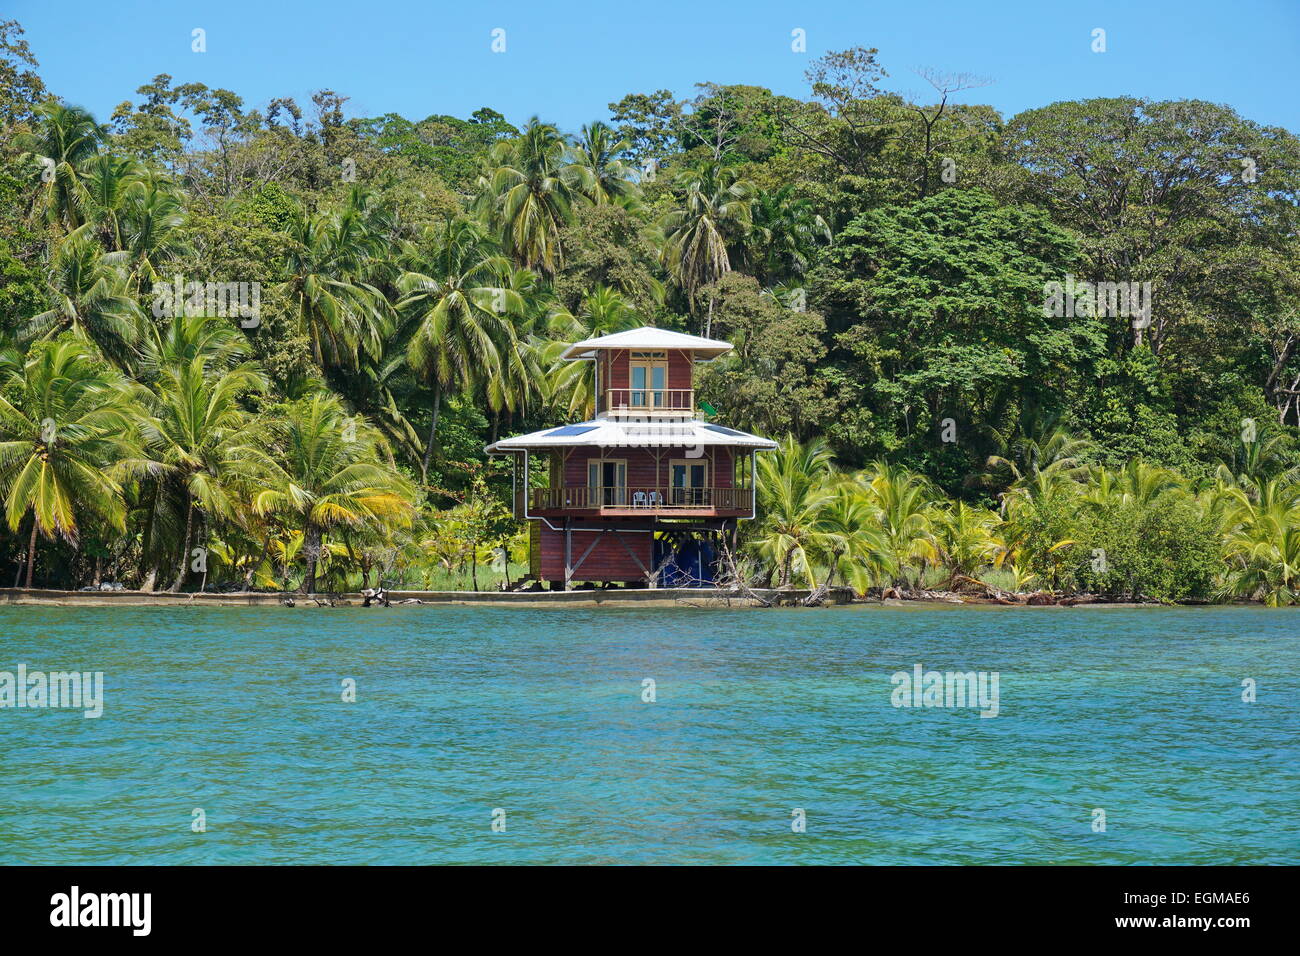 Waterfront tropical house and vegetation on the Caribbean island of Bastimentos, Bocas del Toro, Panama, Central America Stock Photo